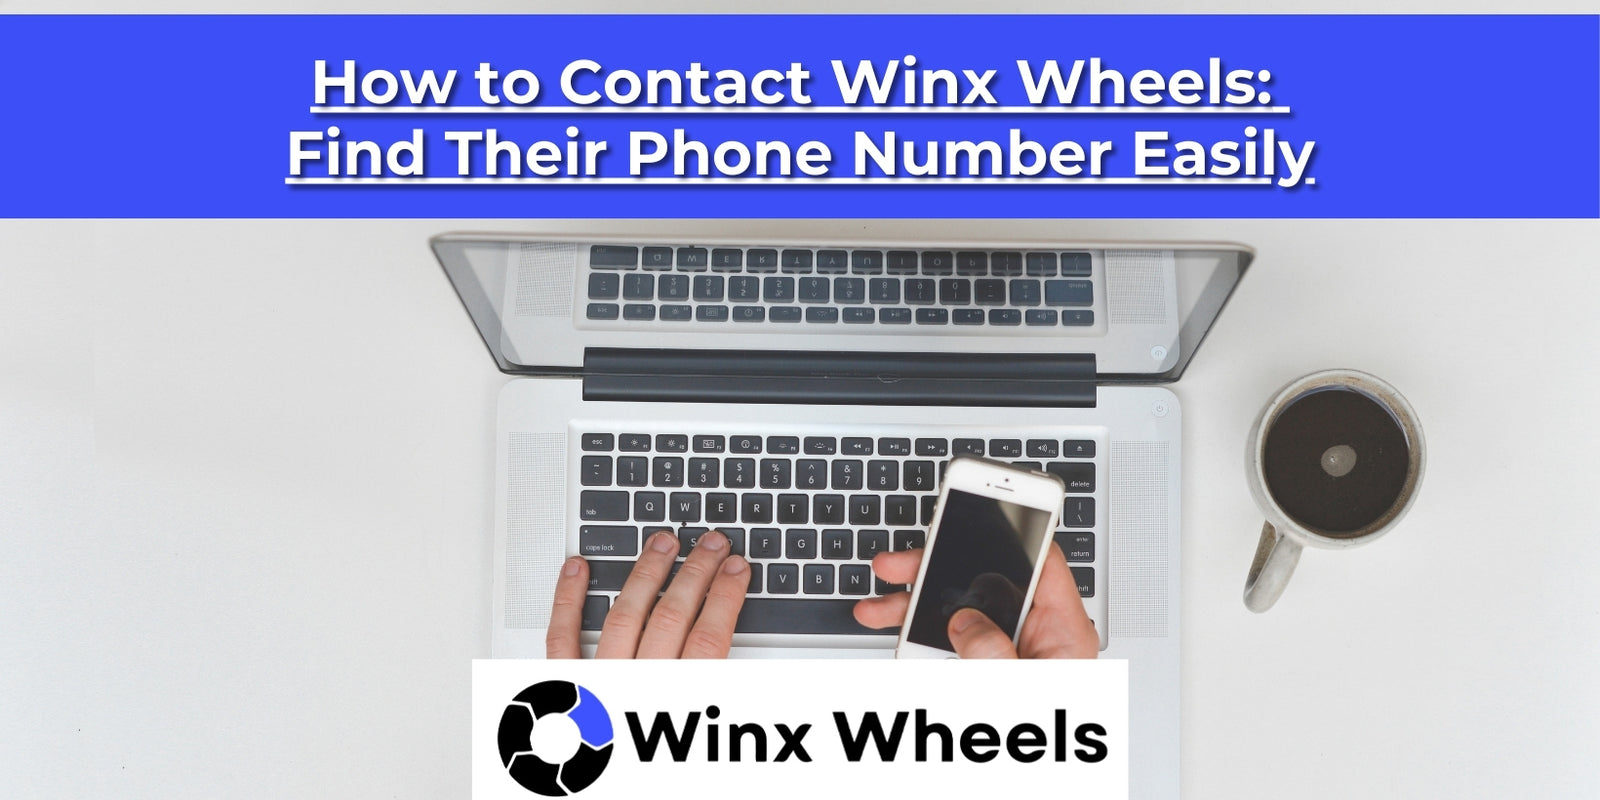 How to Contact Winx Wheels: Find Their Phone Number Easily